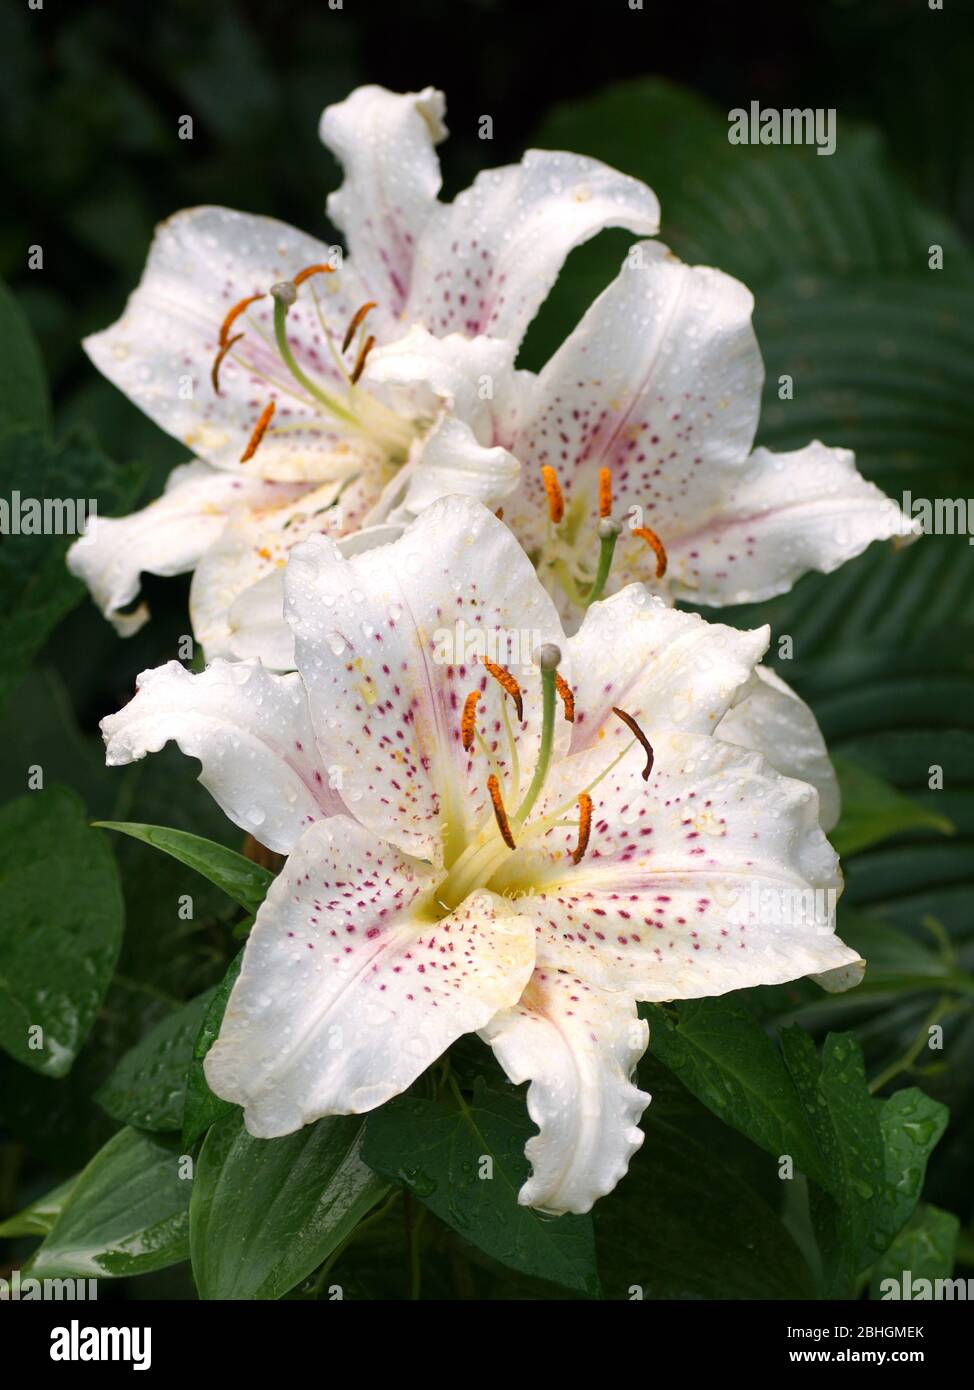 Oriental lily blooms in the garden. Beautiful lily flowers close-up. Stock Photo